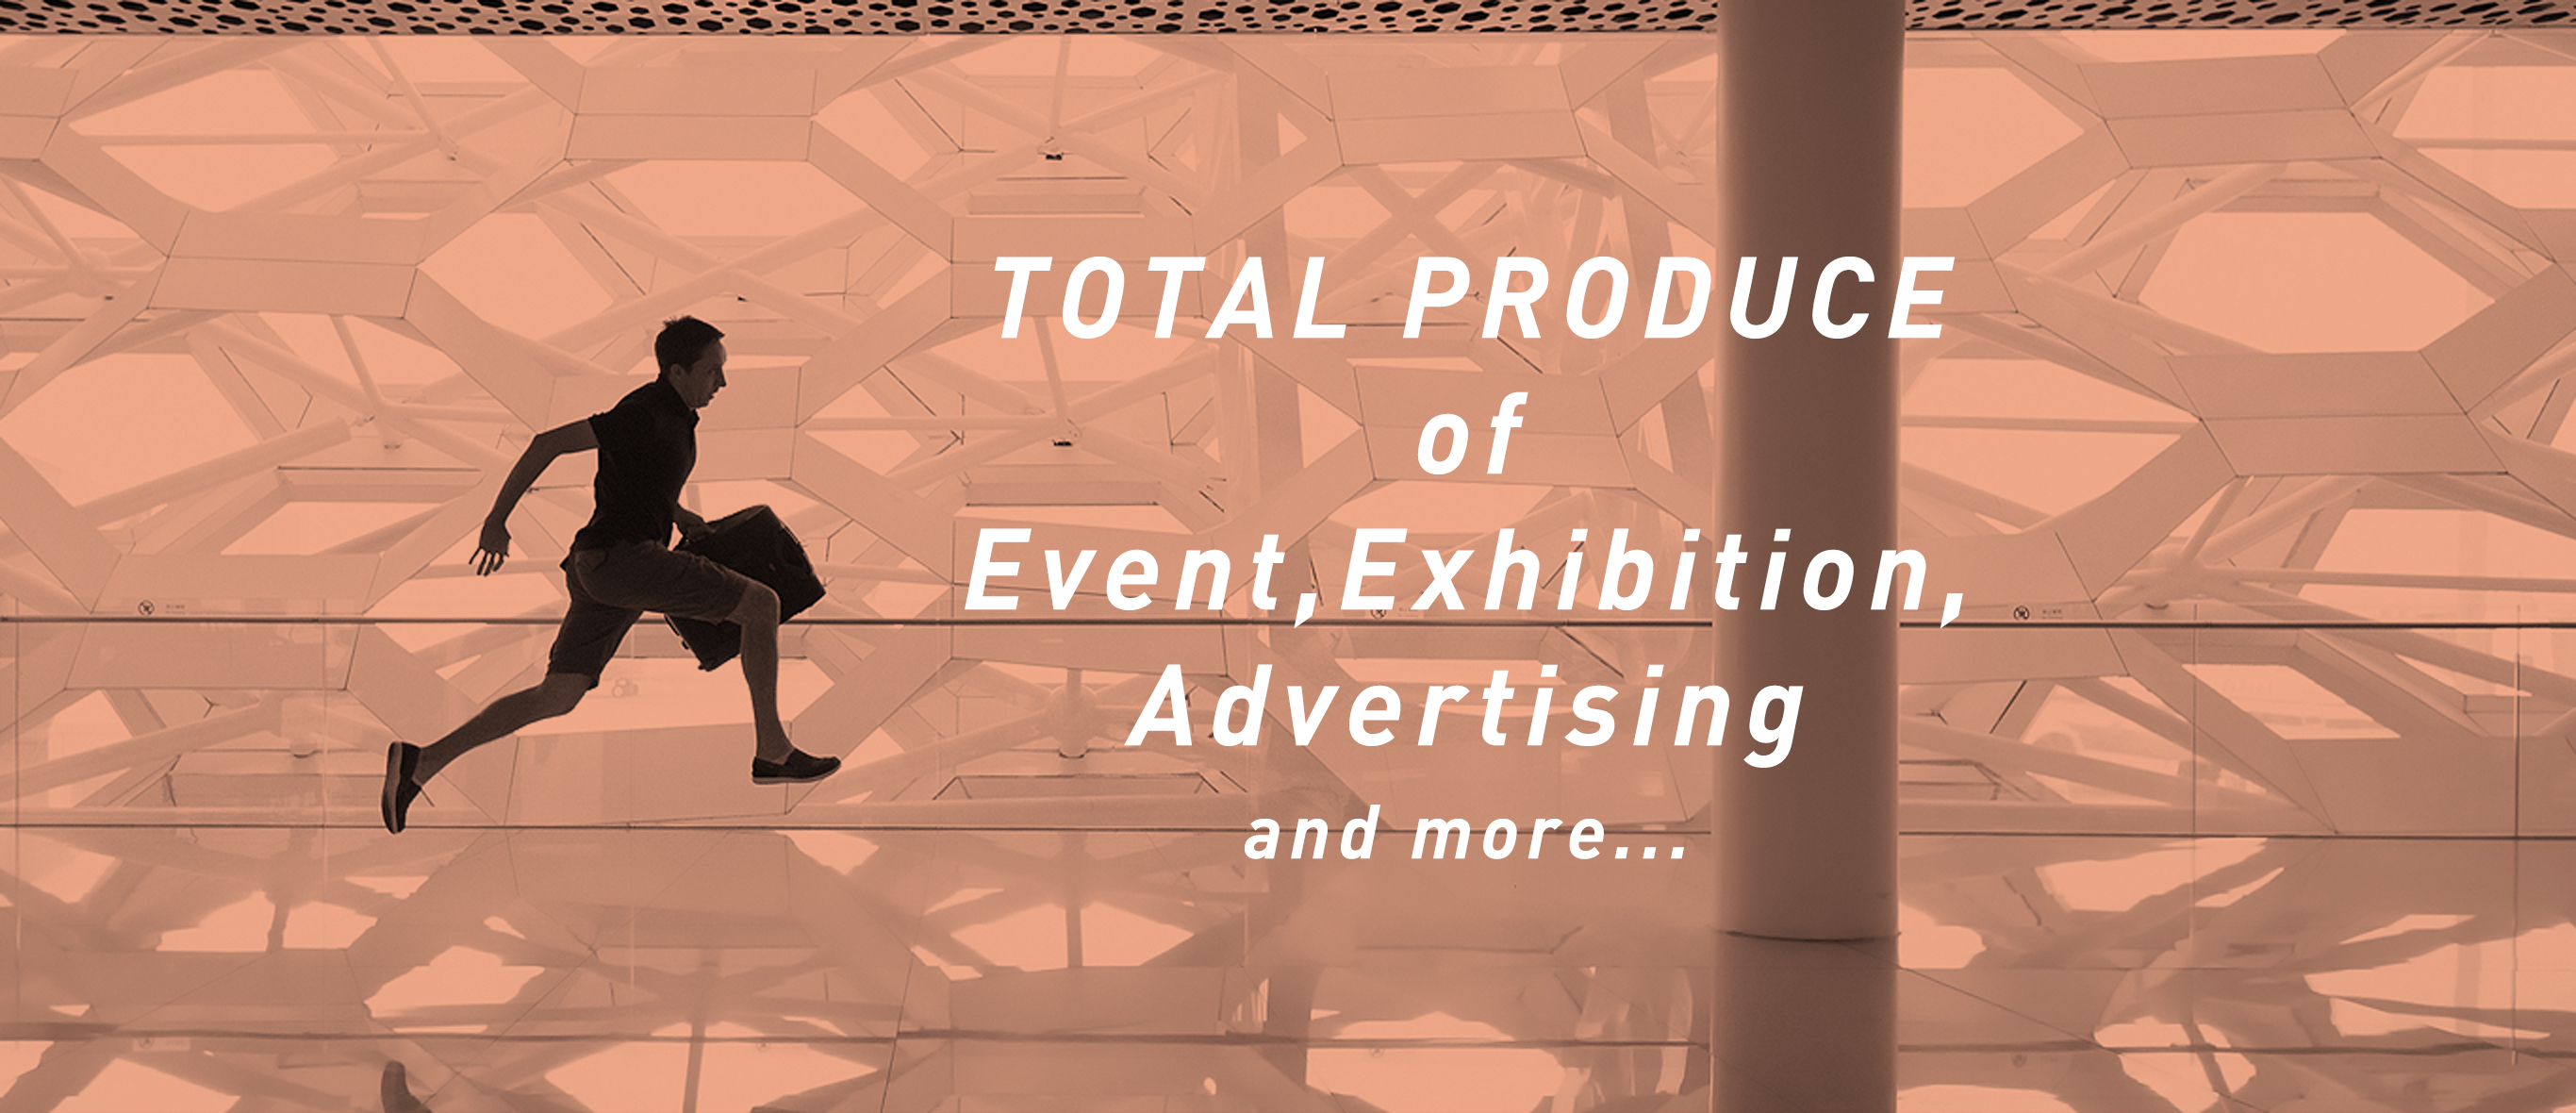 TOTAL PRODUCE of Event,Exhivition and more...